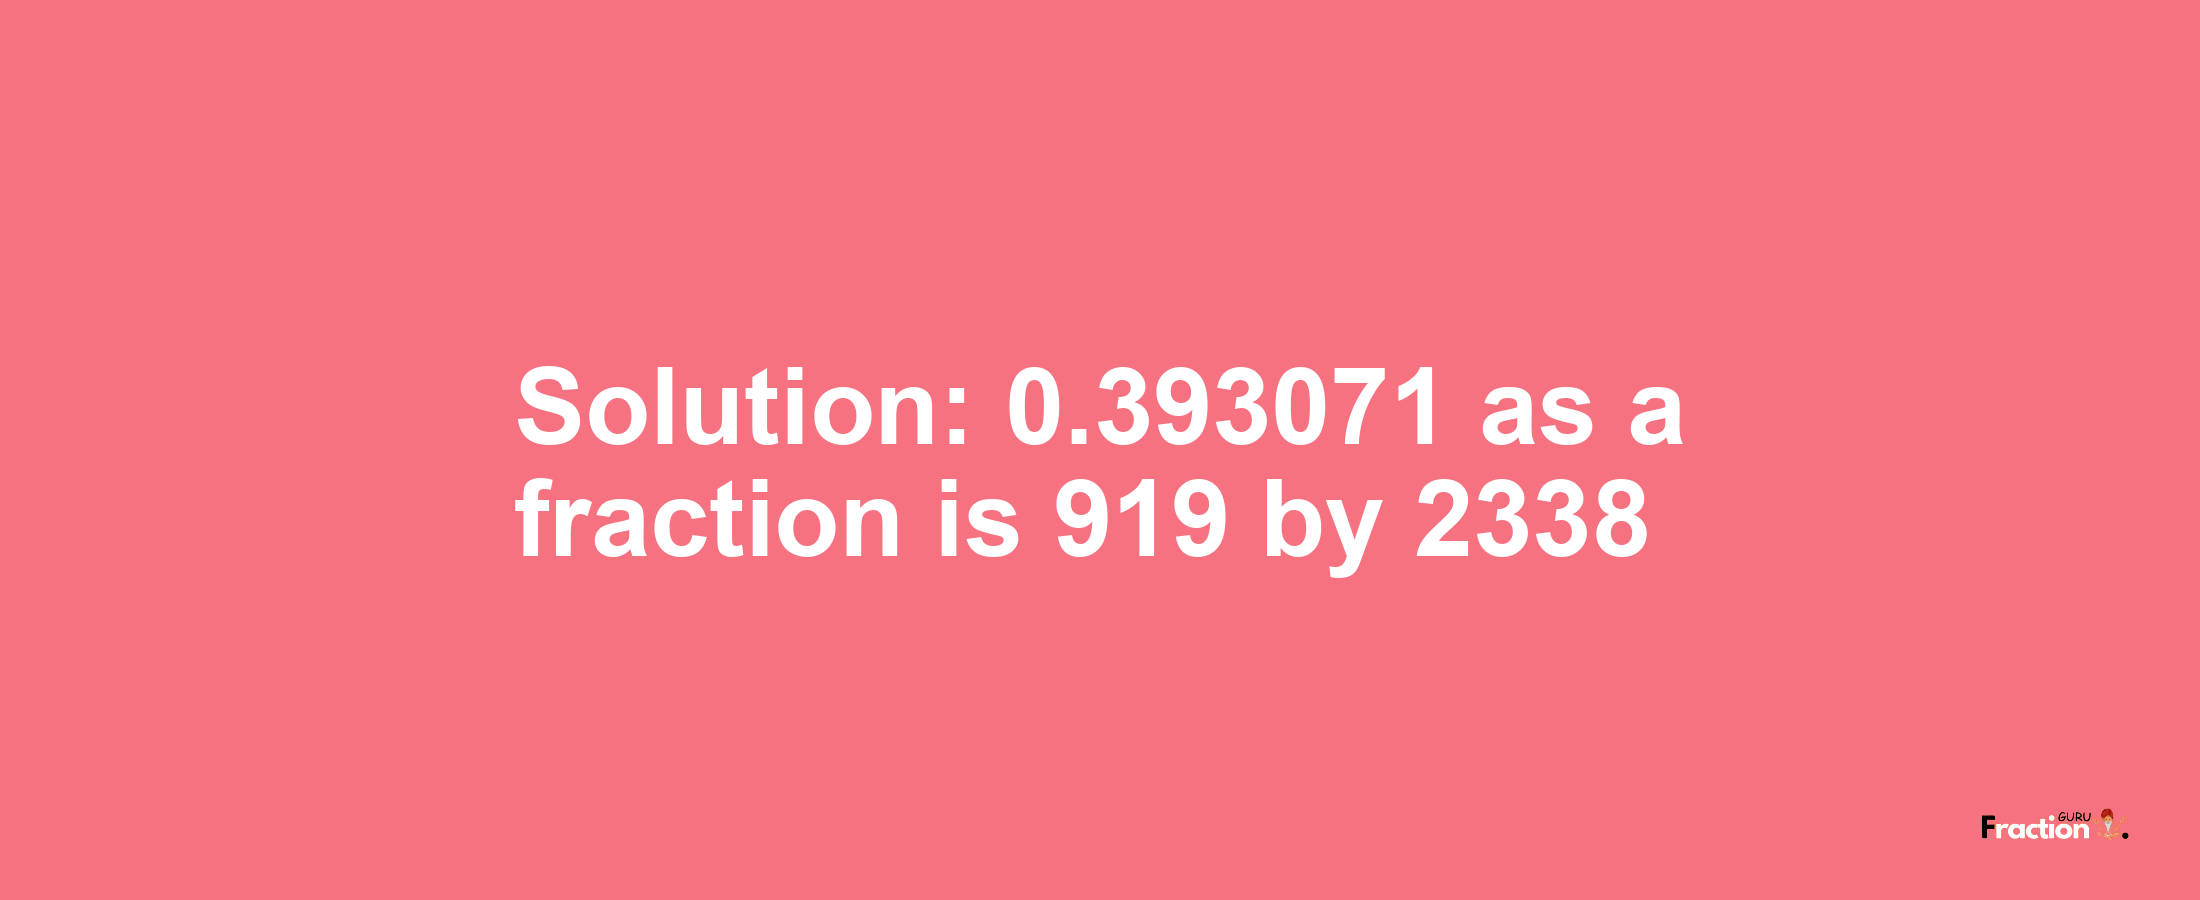 Solution:0.393071 as a fraction is 919/2338